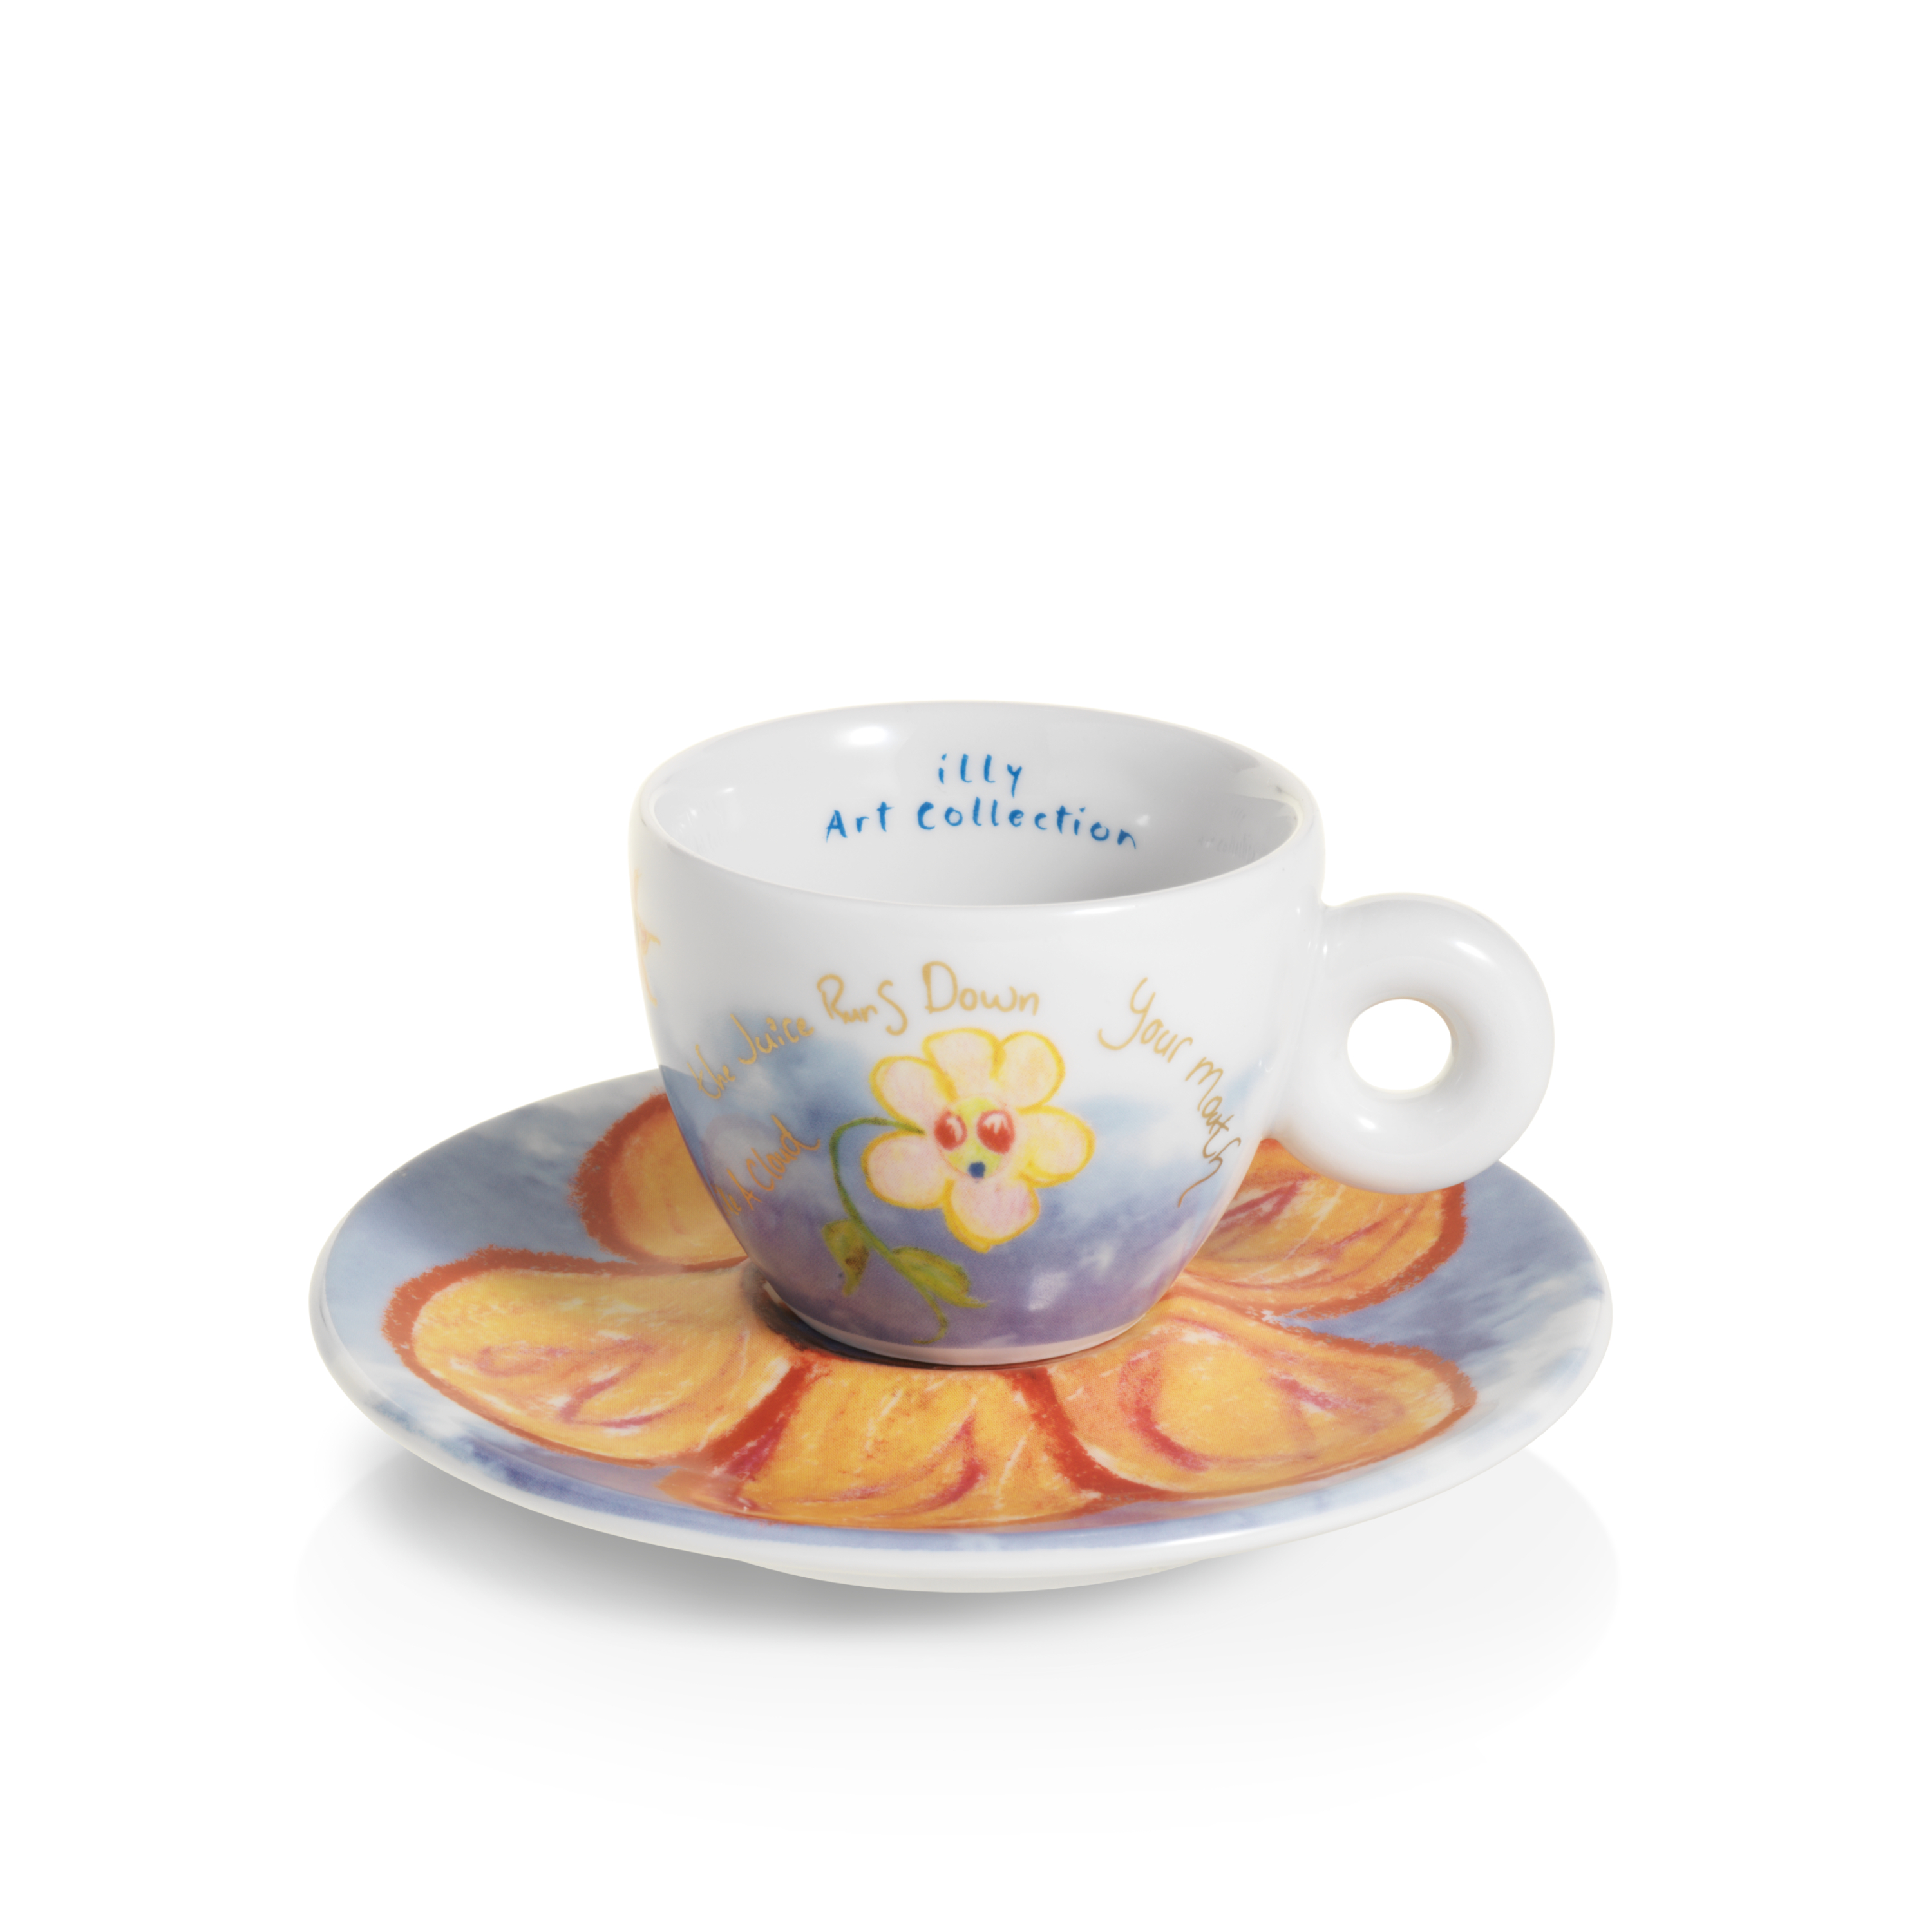 illy Art Collection ΒΙΕΝΝΑLE 2022 Gift Set 2 Espresso Cups | OKOYOMON & PIRICI, Cups, 02-02-6080